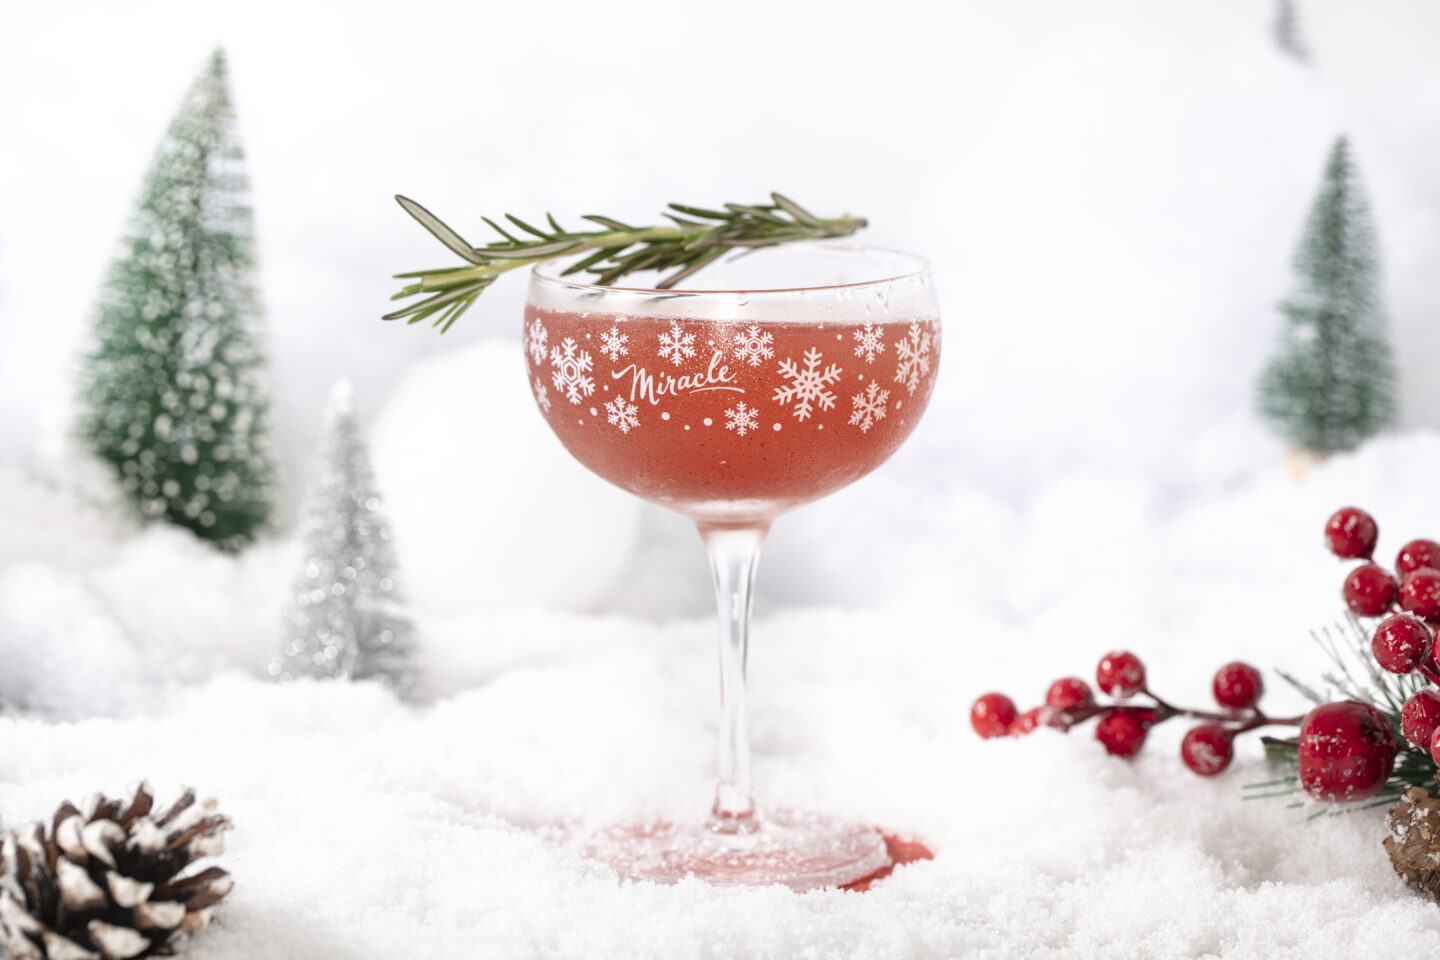 Christmas cocktail from Miracle Toronto holiday popup bar